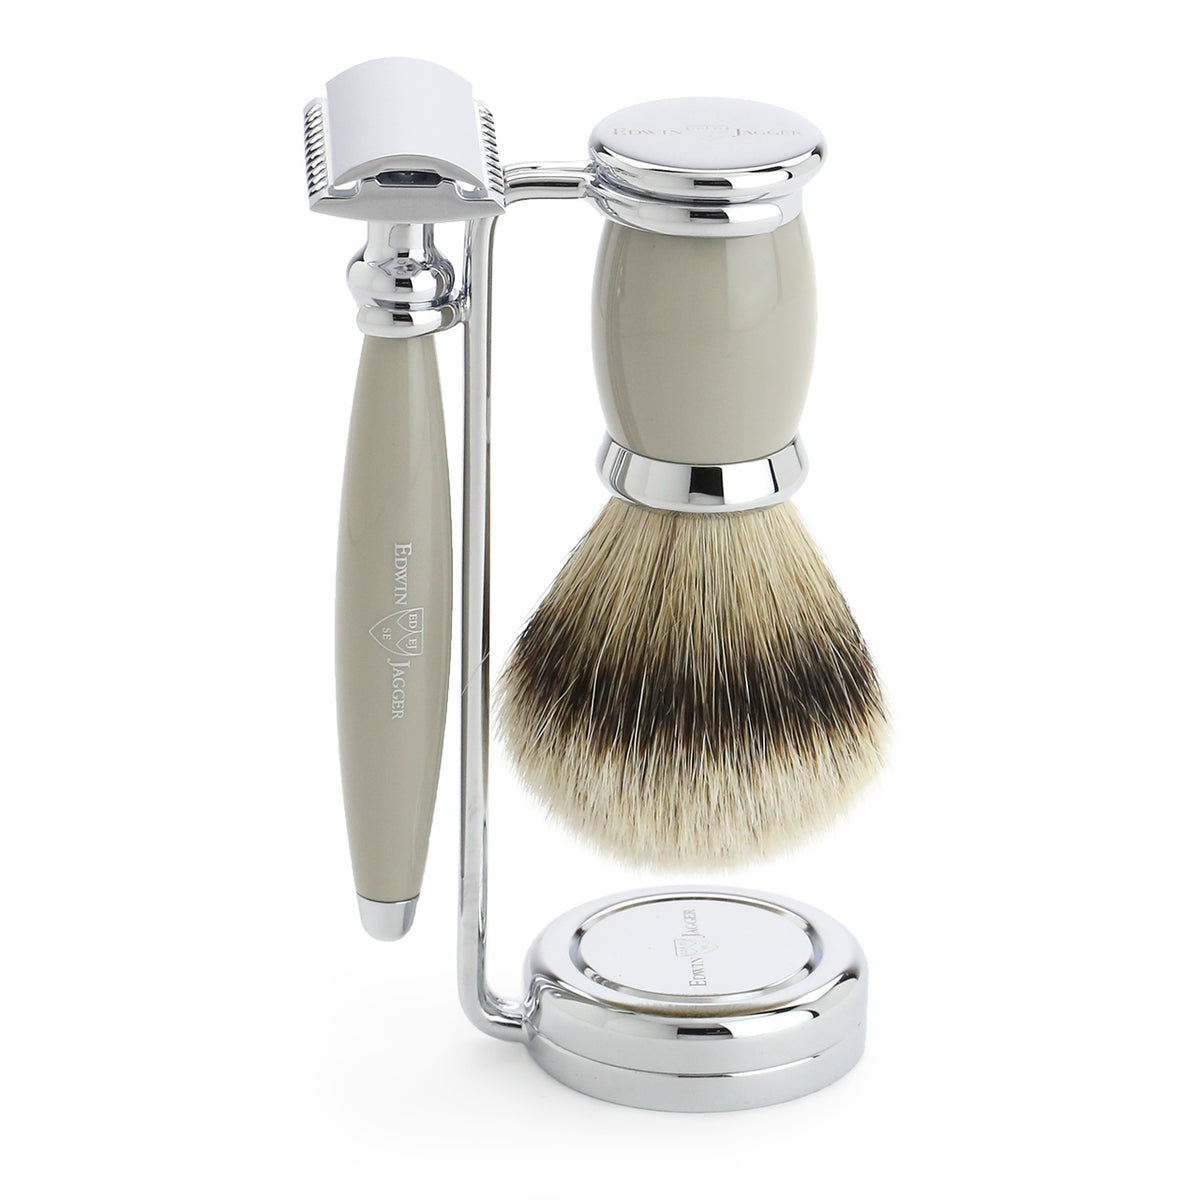 Shaving set with Super Badger Shaving Brush, Safety Razor and Stand in light grey